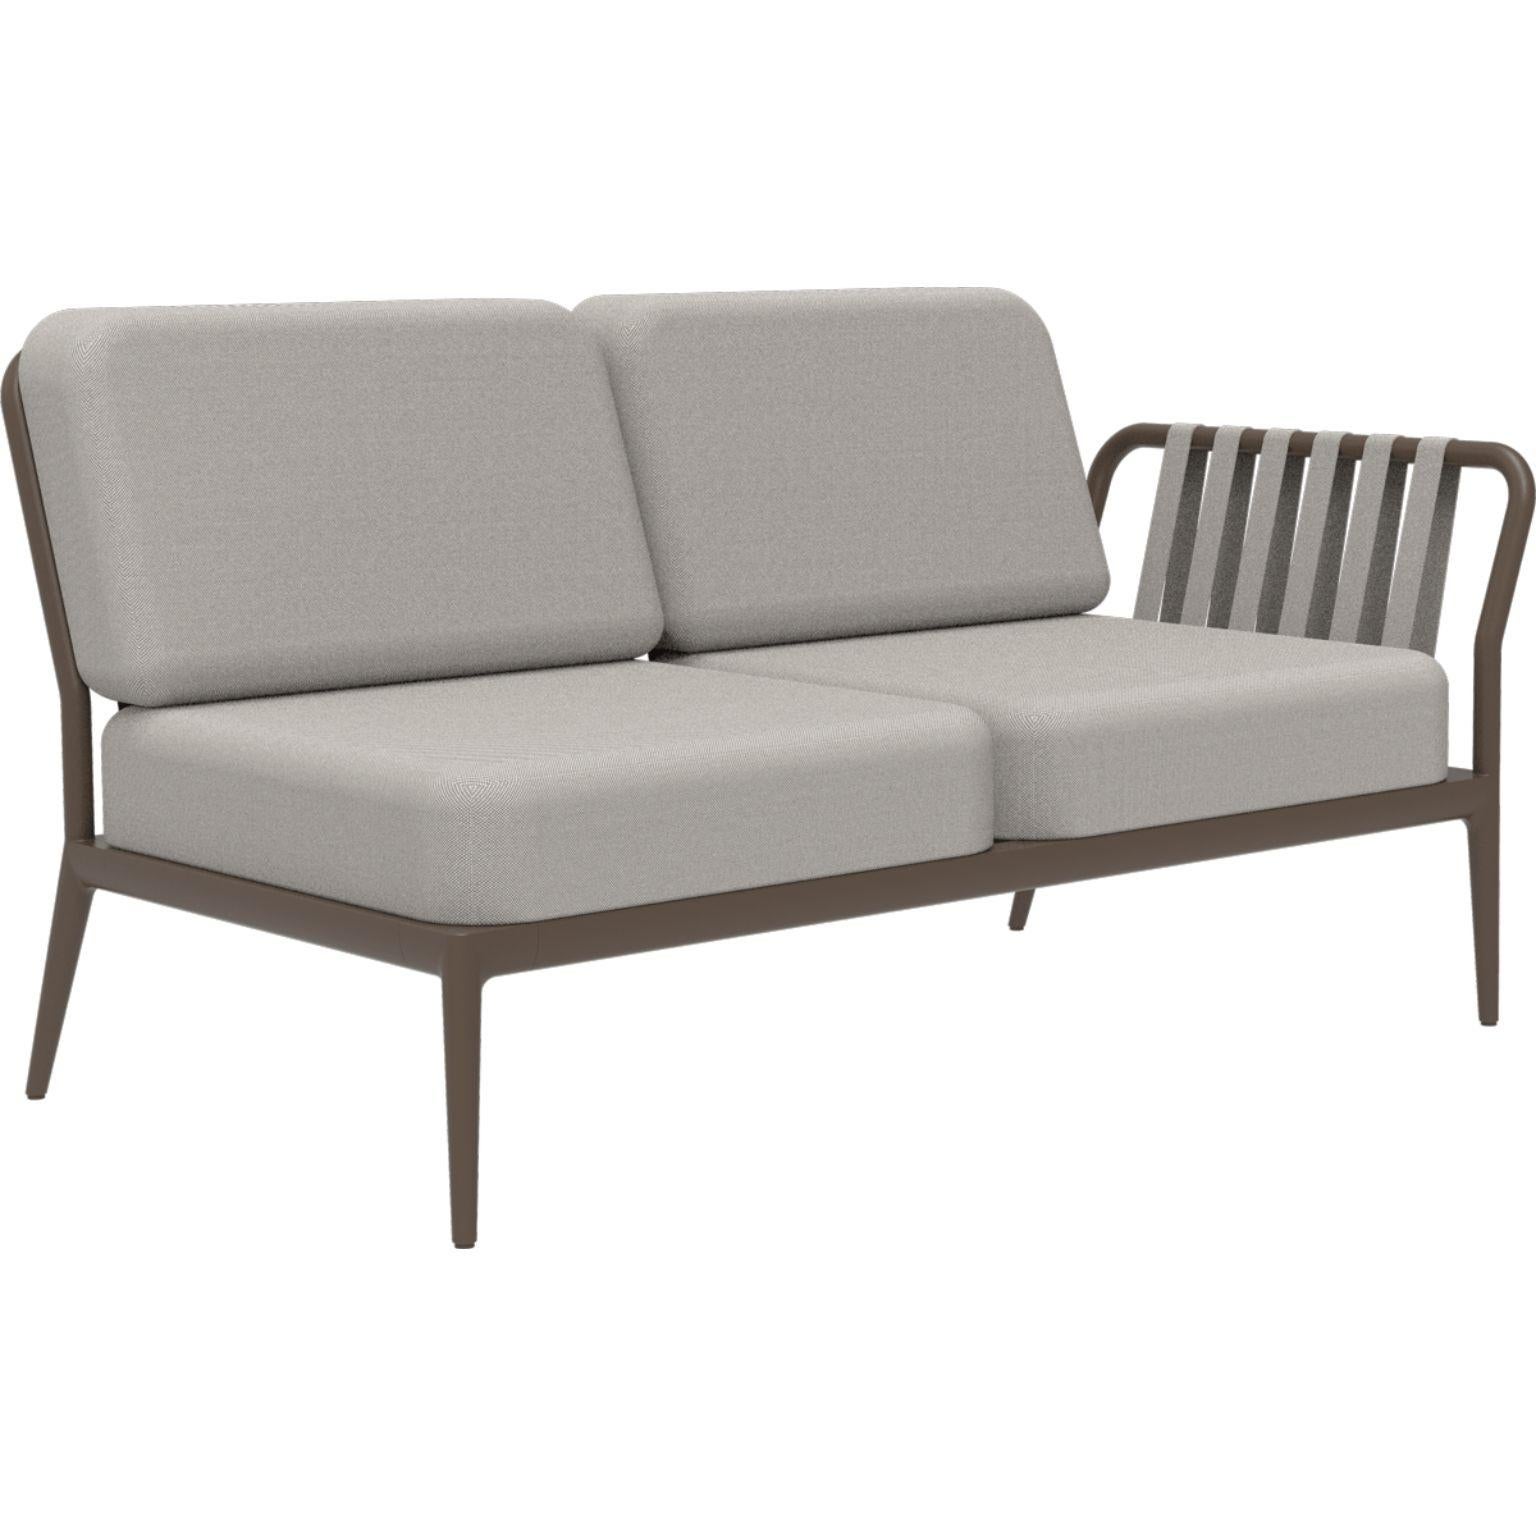 Ribbons bronze double left modular sofa by MOWEE
Dimensions: D83 x W148 x H81 cm (seat height 42 cm).
Material: Aluminium and upholstery.
Weight: 29 kg
Also available in different colors and finishes. 

An unmistakable collection for its